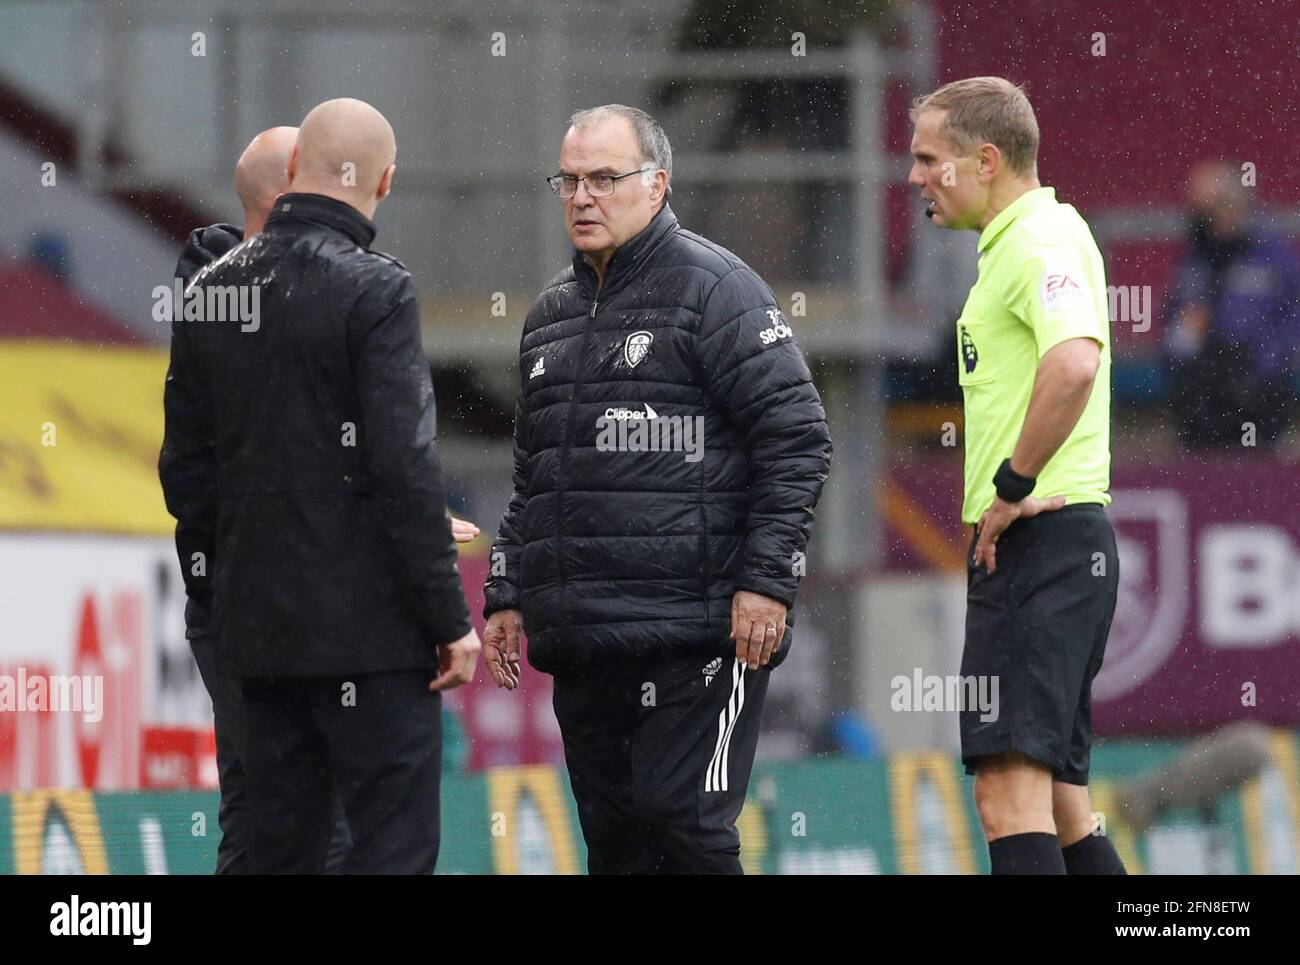 Burnley, UK. 15th May, 2021. Referee Graham Scott has words with Sean Dyche manager of Burnley and Marcelo Bielsa manager of of Leeds United during the Premier League match at Turf Moor, Burnley. Picture credit should read: Darren Staples/Sportimage Credit: Sportimage/Alamy Live News Stock Photo